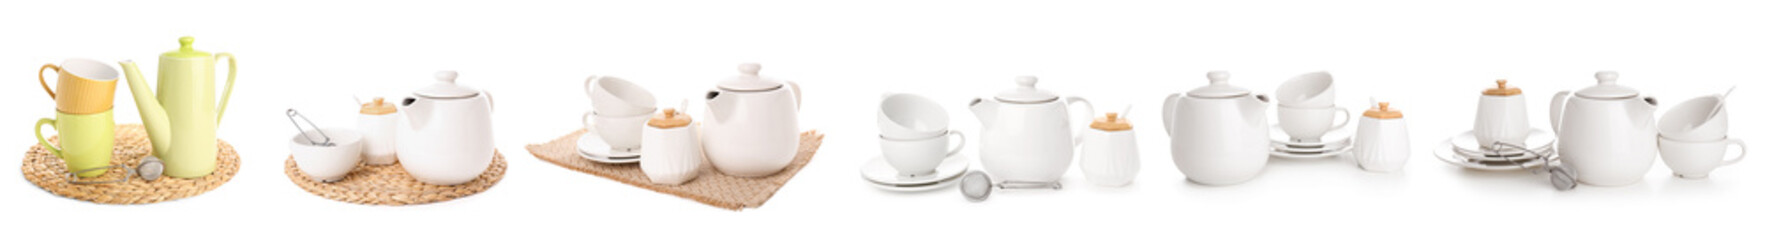 Set of ceramic teapots, cups, saucers, sugar bowls and tea strainers on white background